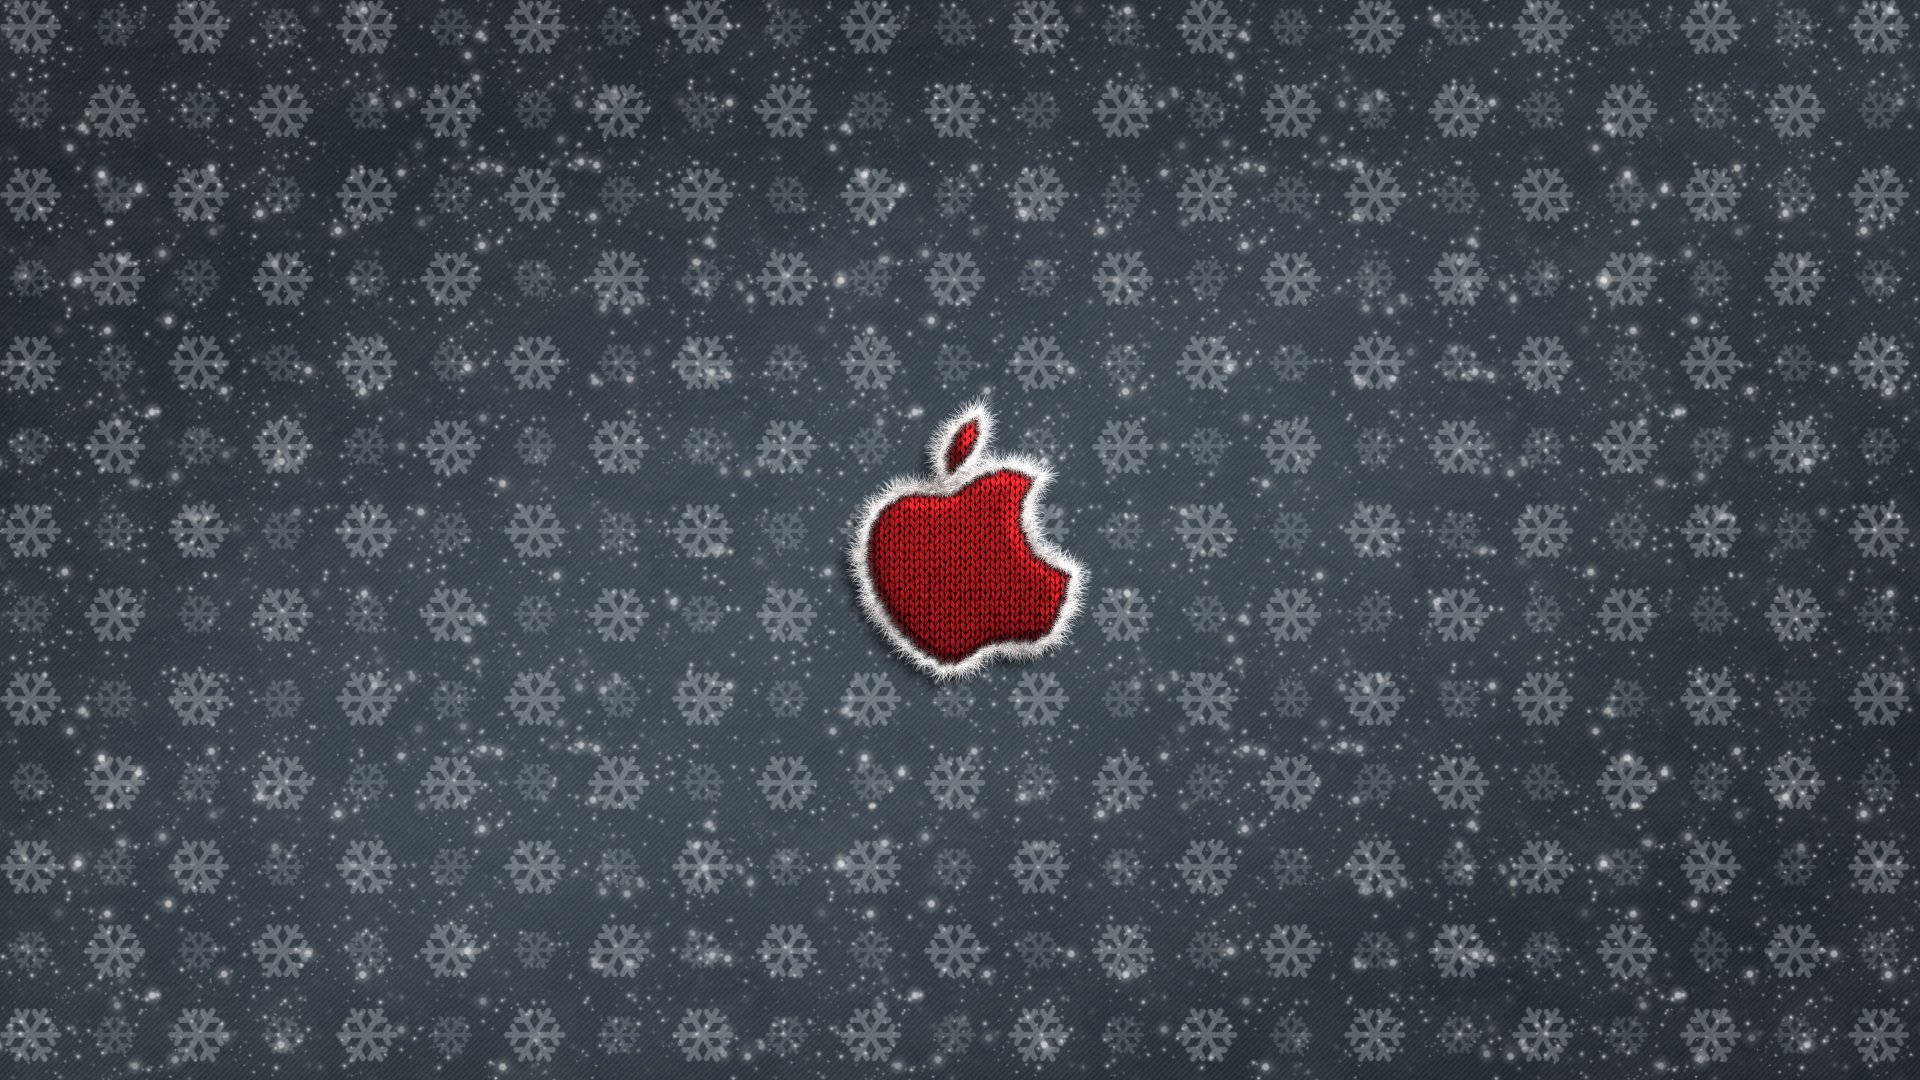 Red Apple Logo With Snowflakes Wallpaper